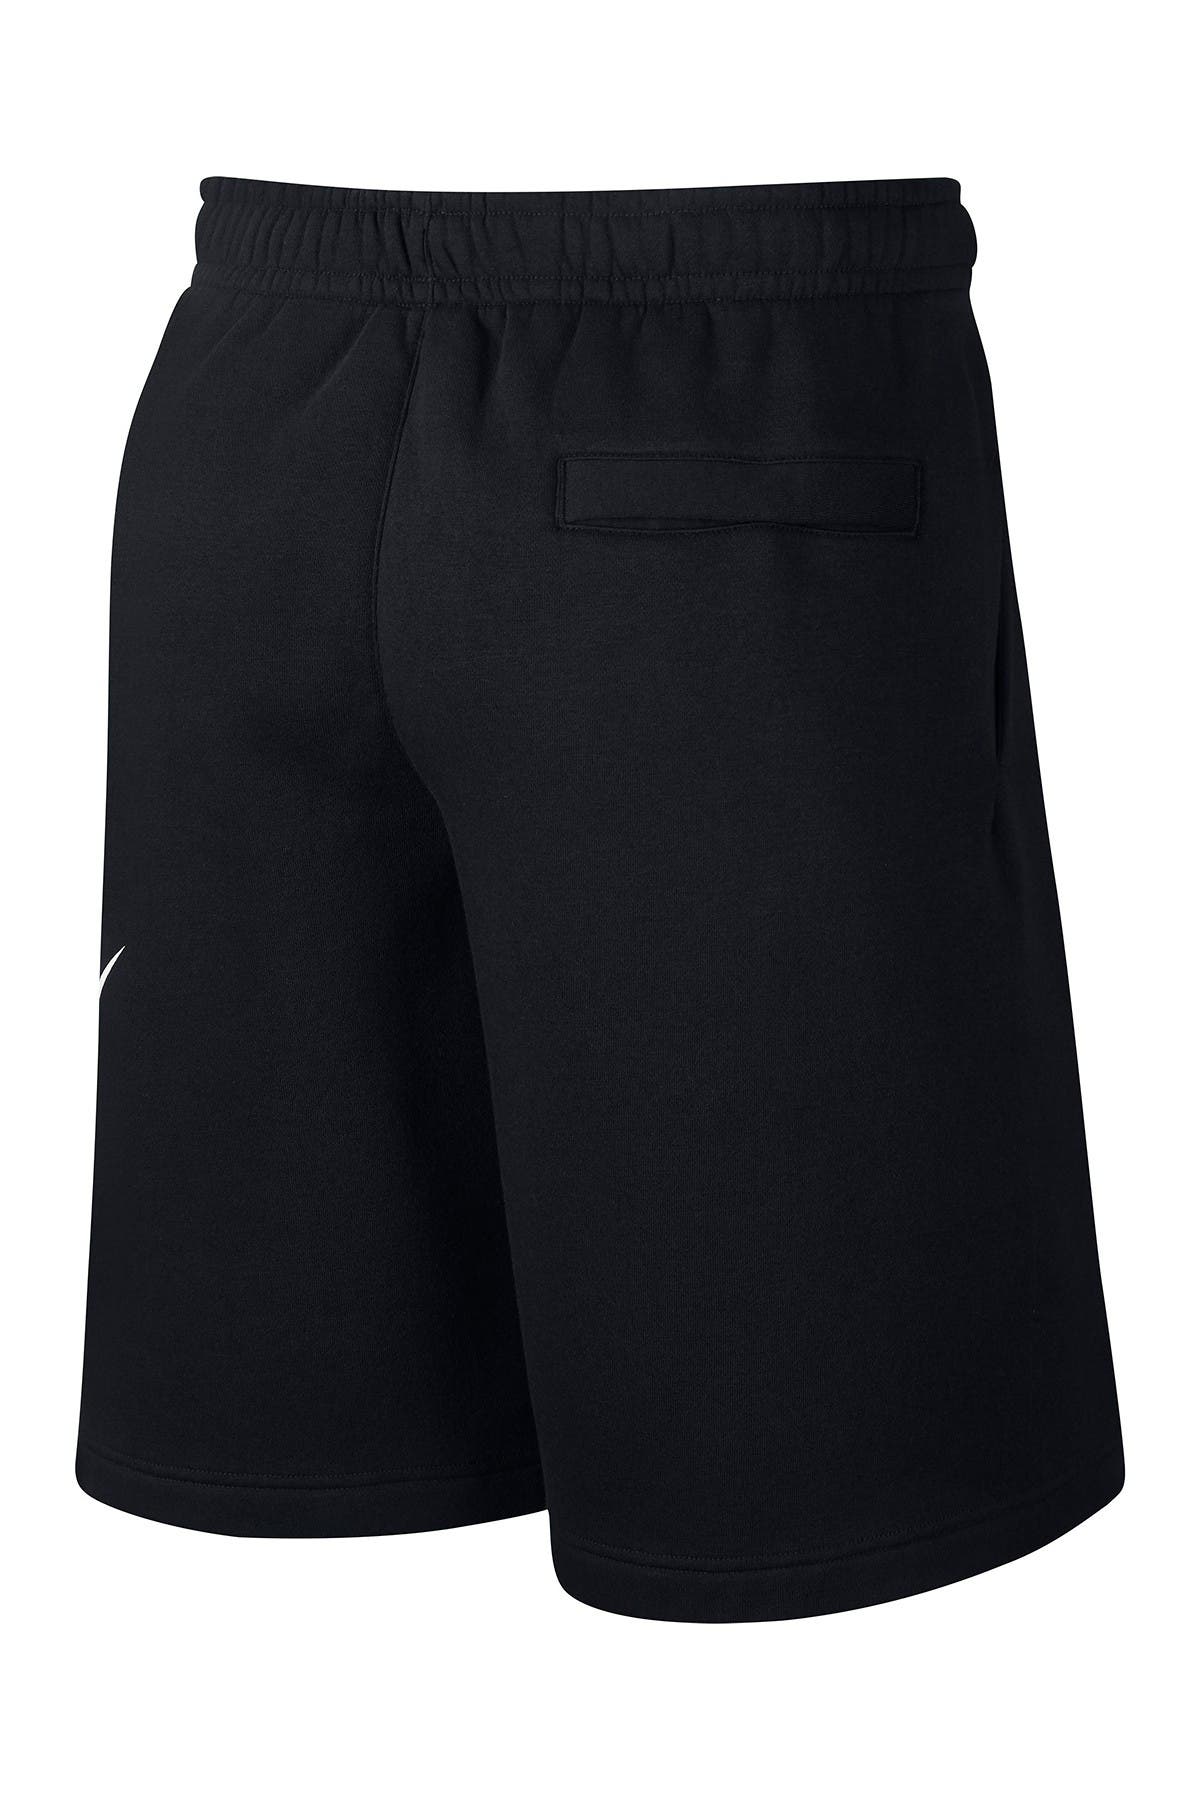 Nike Logo Graphic Club Shorts In Charcoal